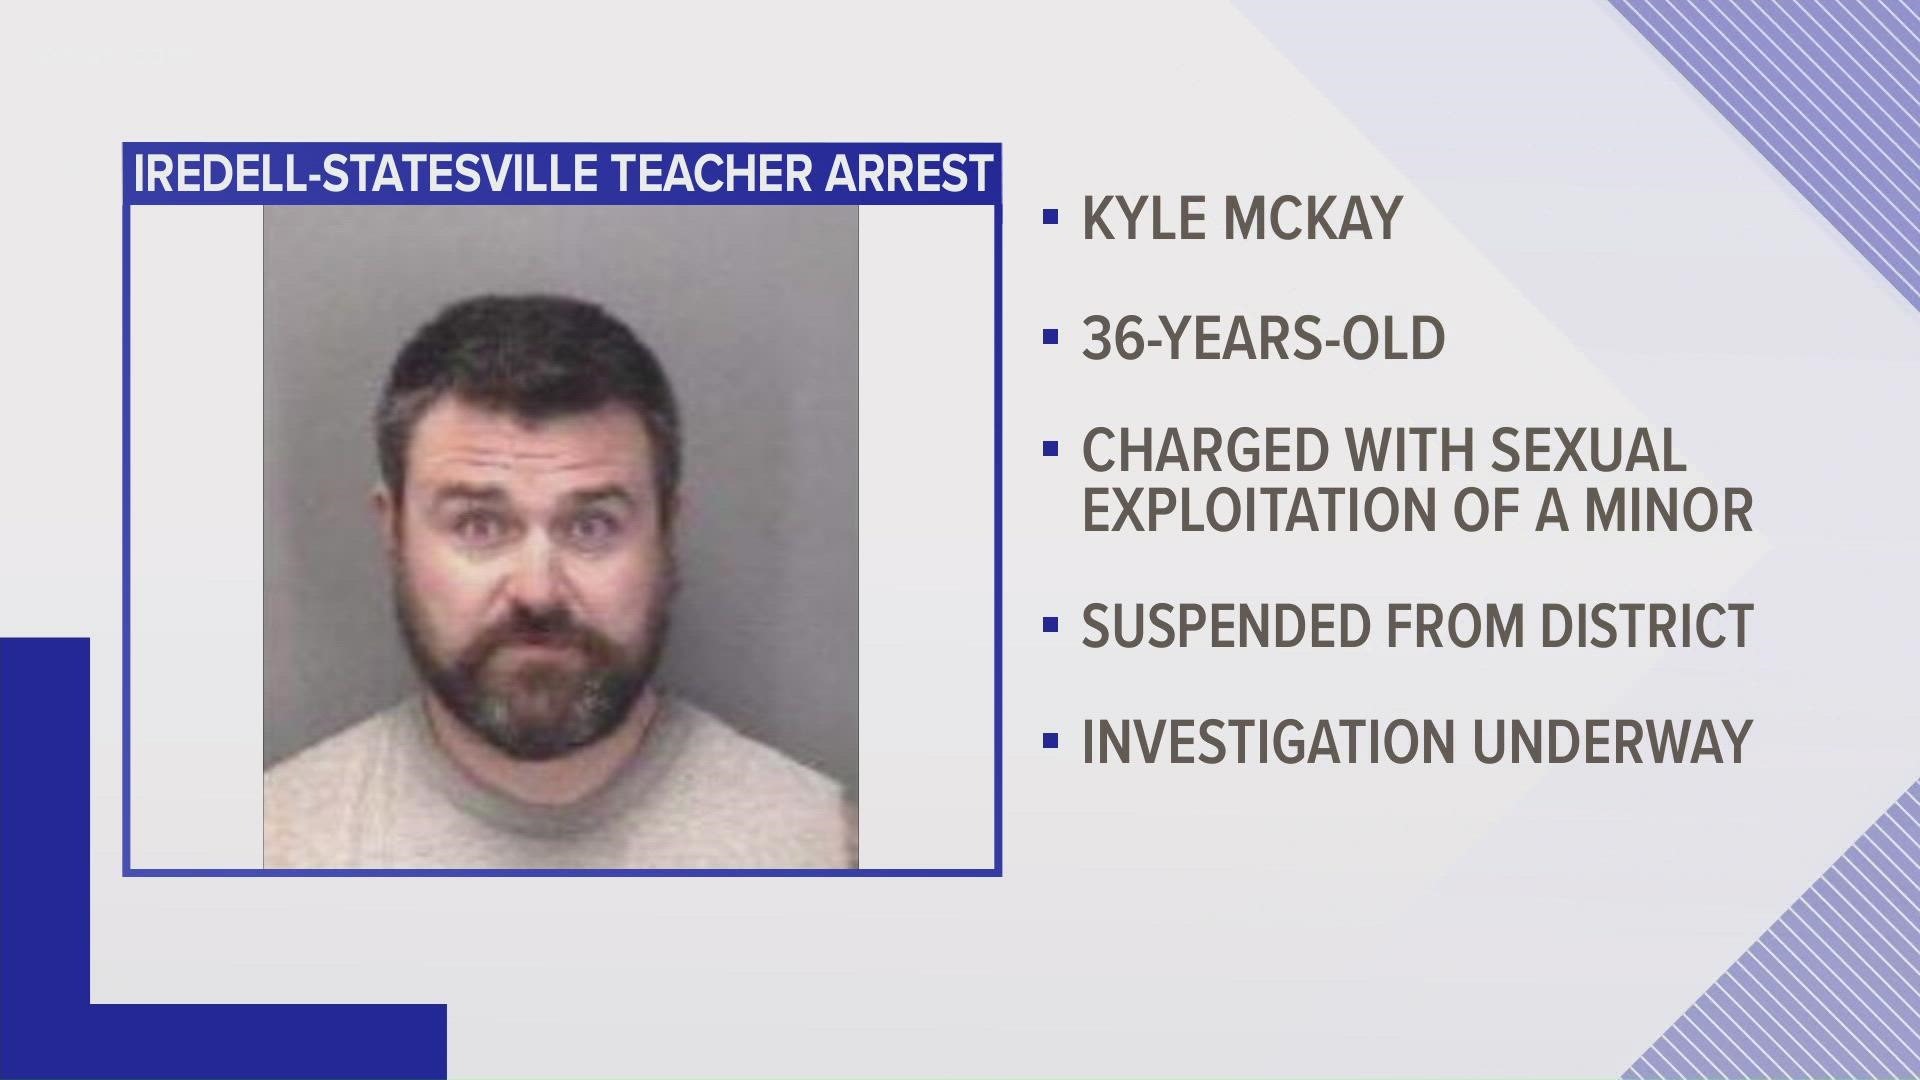 Kyle McKay was already facing charges and has two additional counts in connection to child pornography.